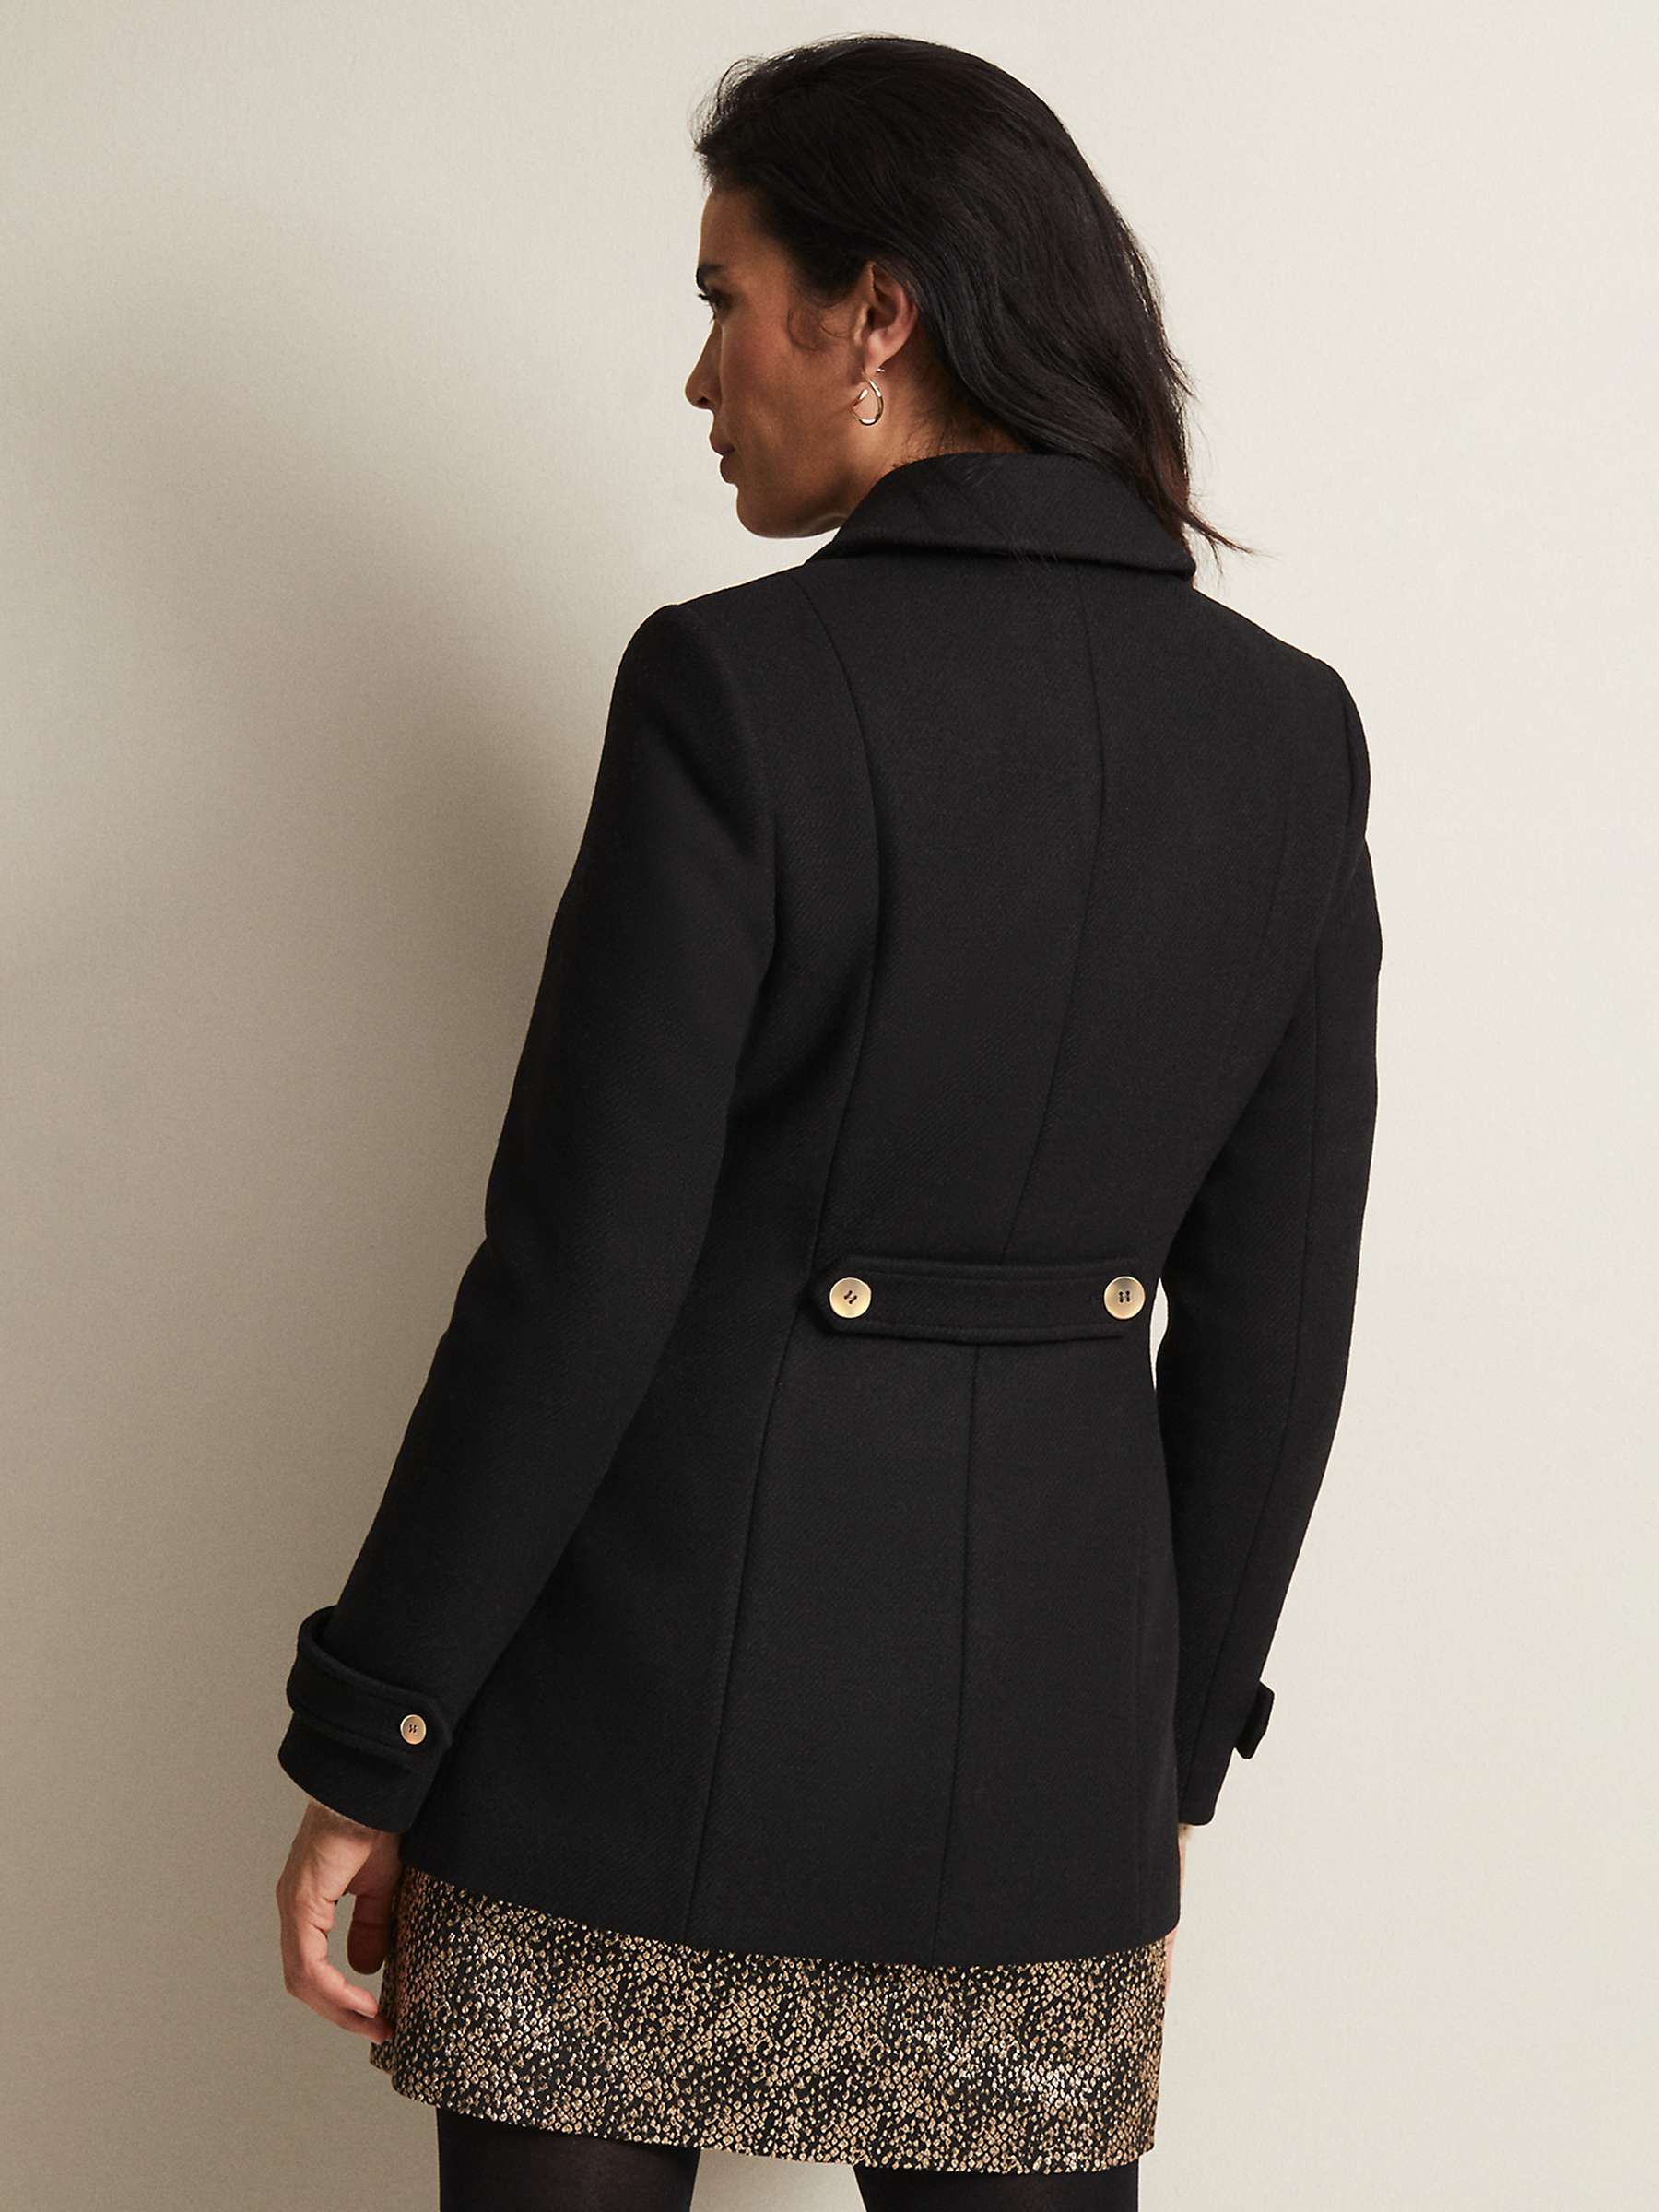 Buy Phase Eight Aurelie Double Breasted Wool Blend Peacoat, Black Online at johnlewis.com